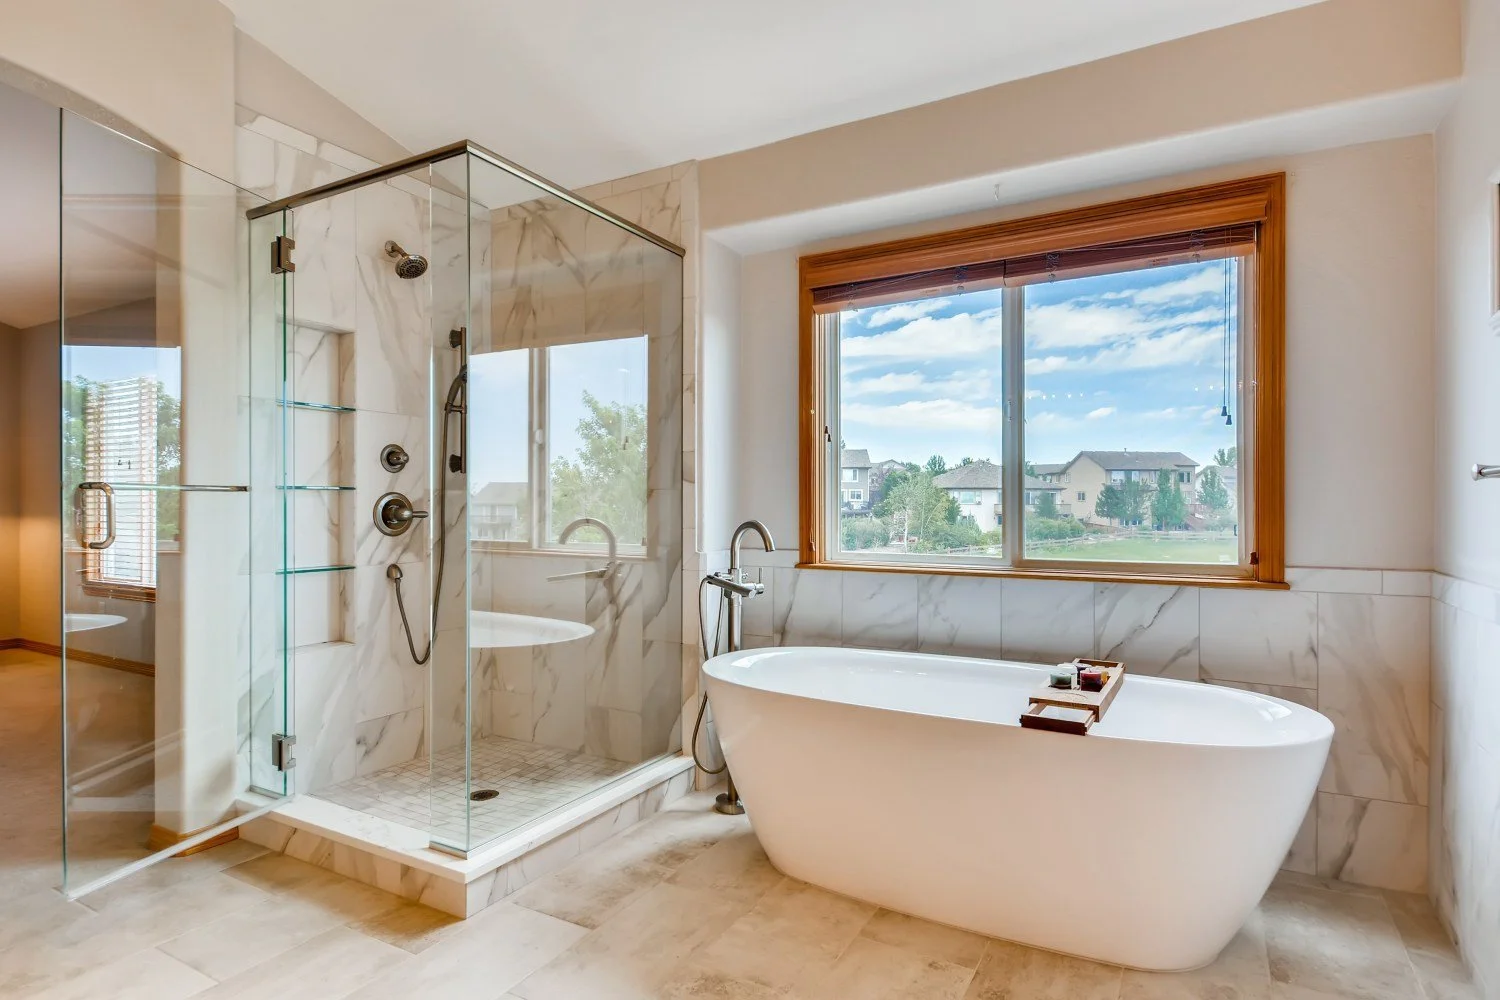 Free Guide to Kitchen & Bath Design in Denver: Best Practices Home Page